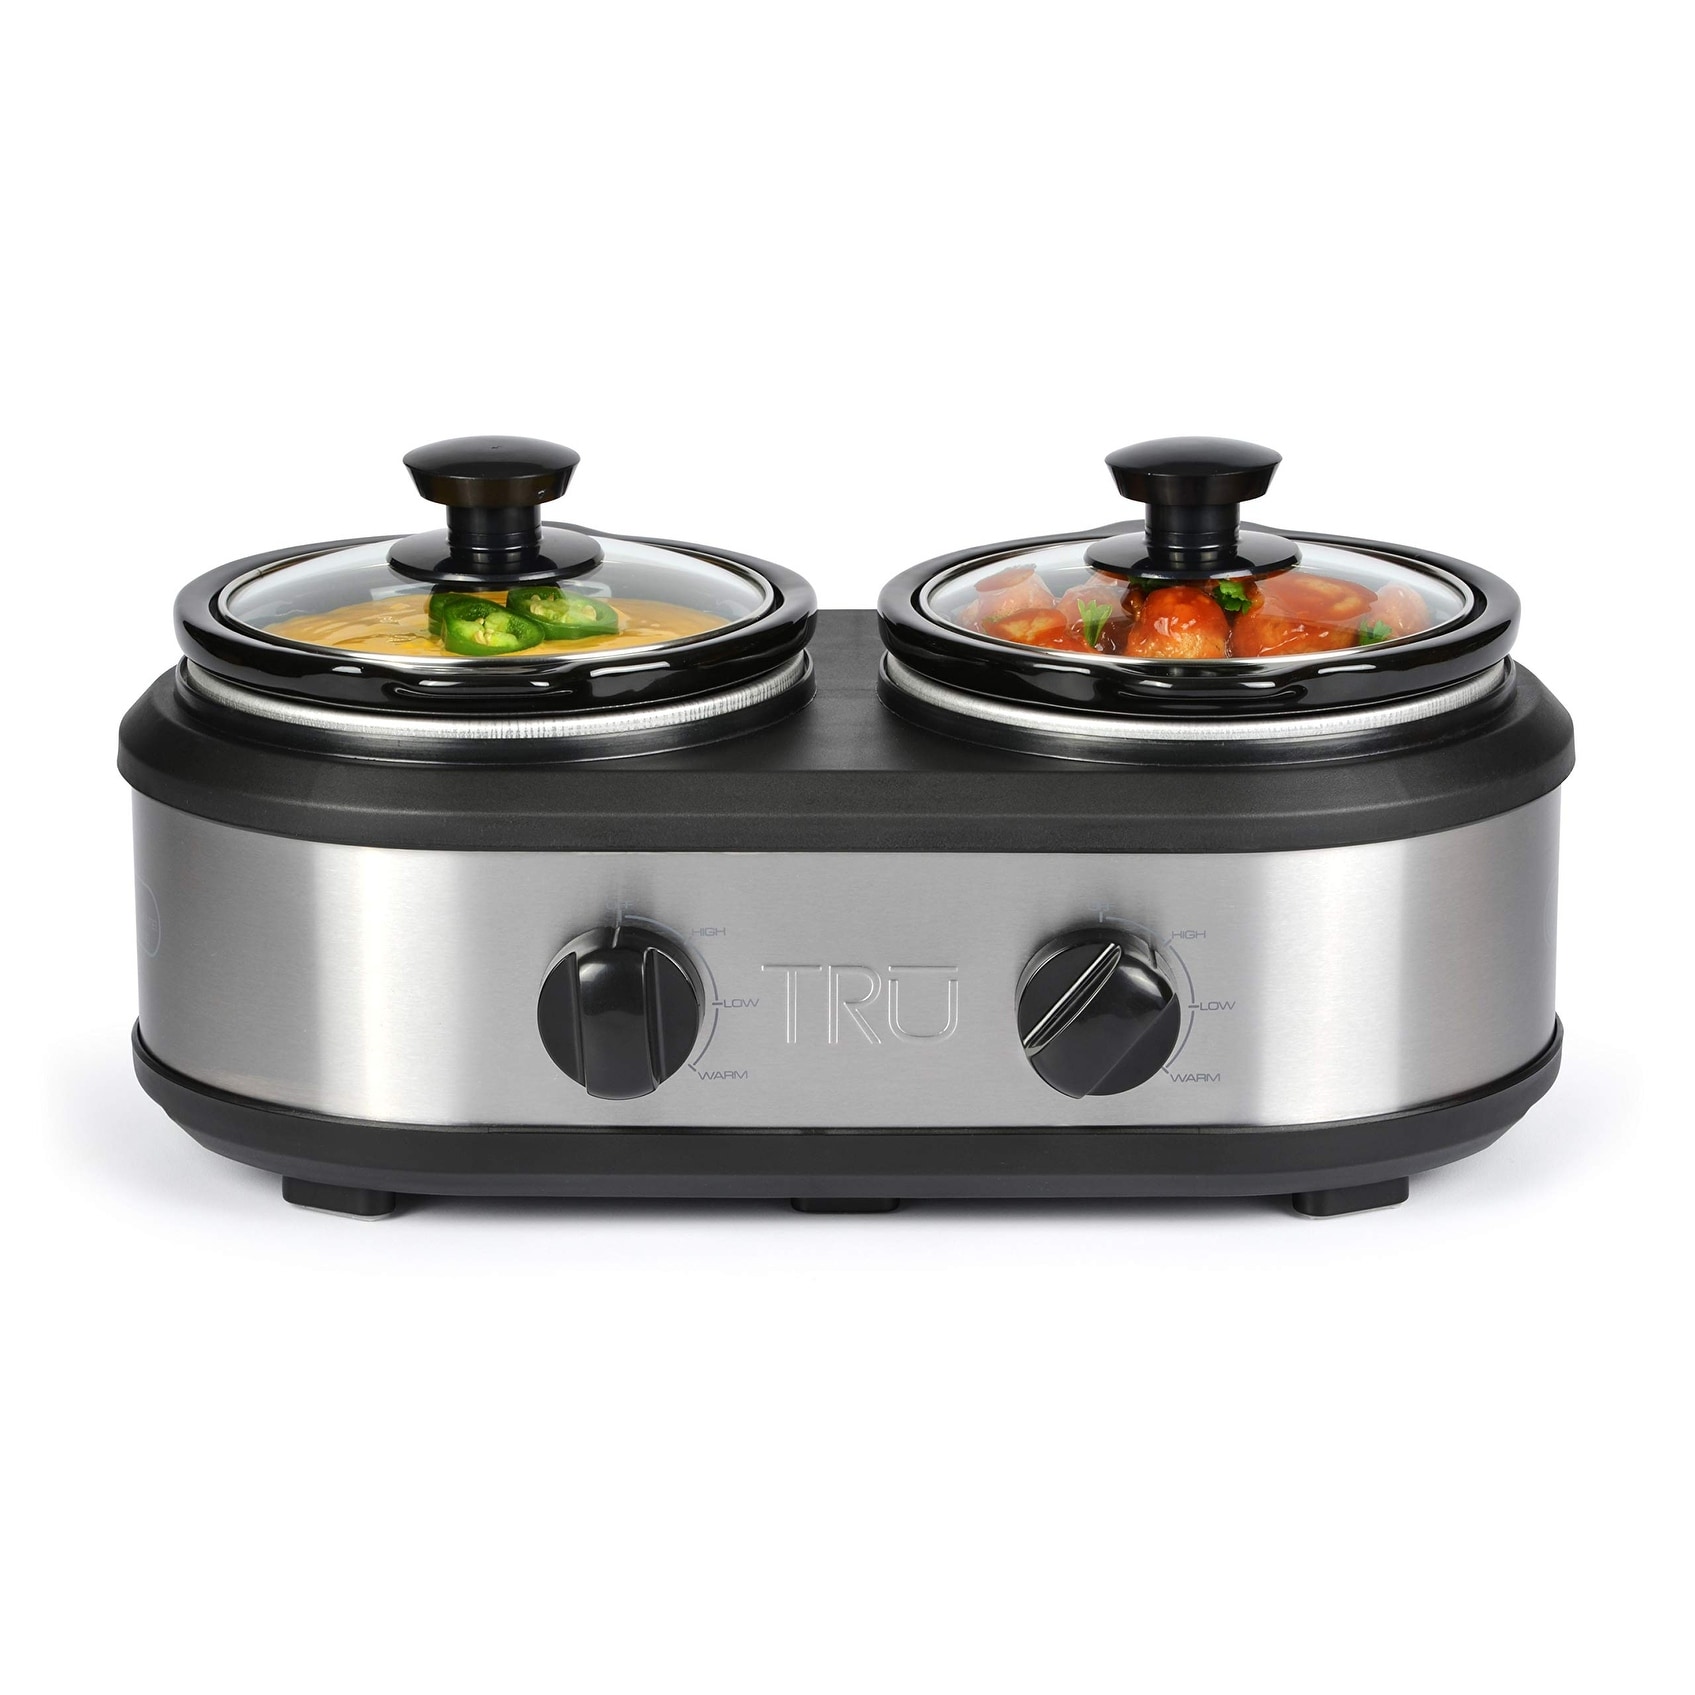 https://ak1.ostkcdn.com/images/products/is/images/direct/c3511563b7afdd1861637c4fc2c586d20f5f7eef/Double-Slow-Cooker-by-Select-Brands---Double-Buffet-Server%2C-Double-Slow-Cooker-Buffet-Server---2-Inserts%2C-Each-1-1-4-Quarts.jpg